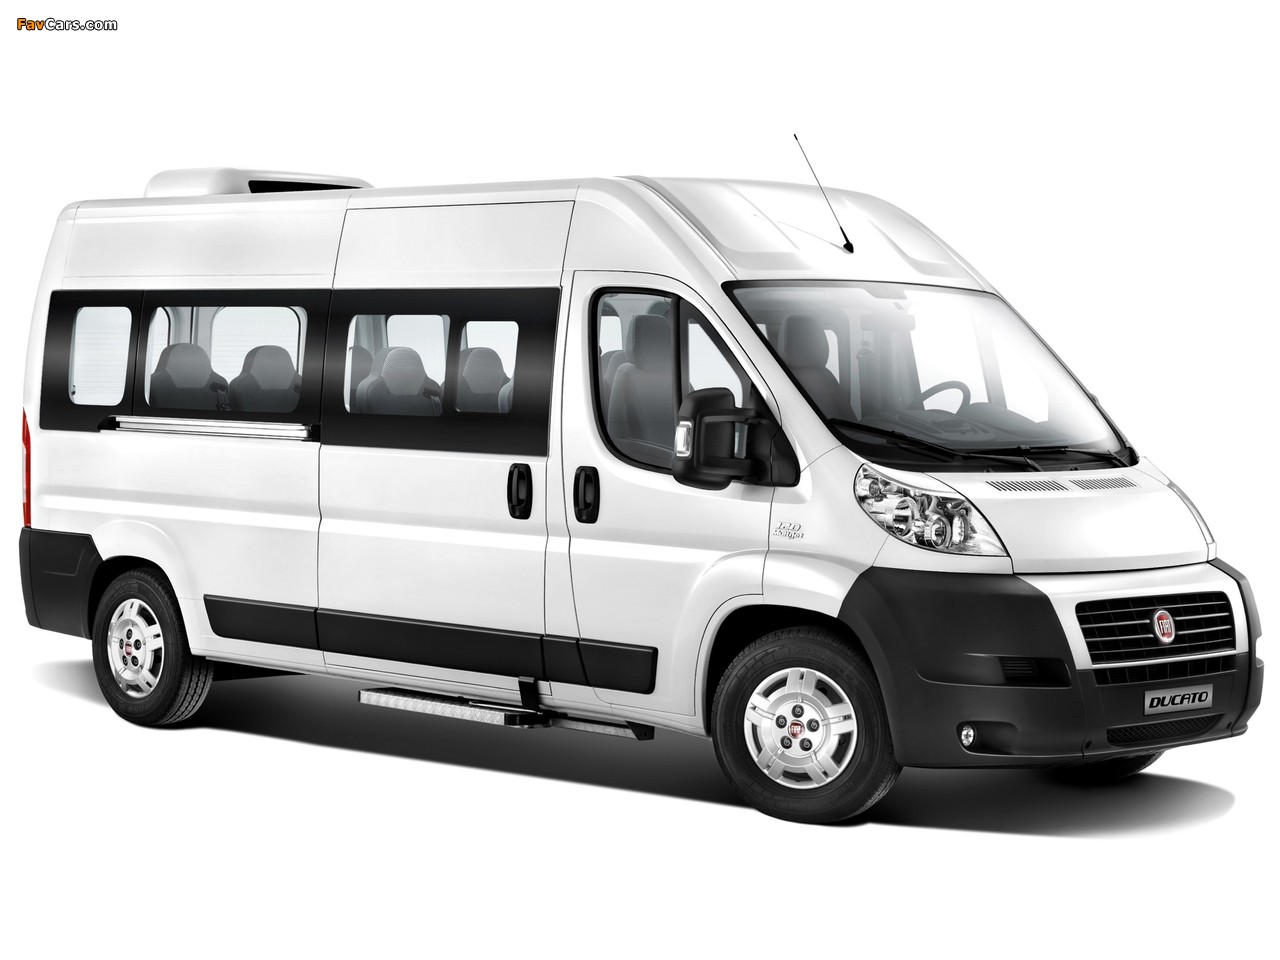 Pictures of Fiat Ducato Panorama 2006 (1280 x 960)